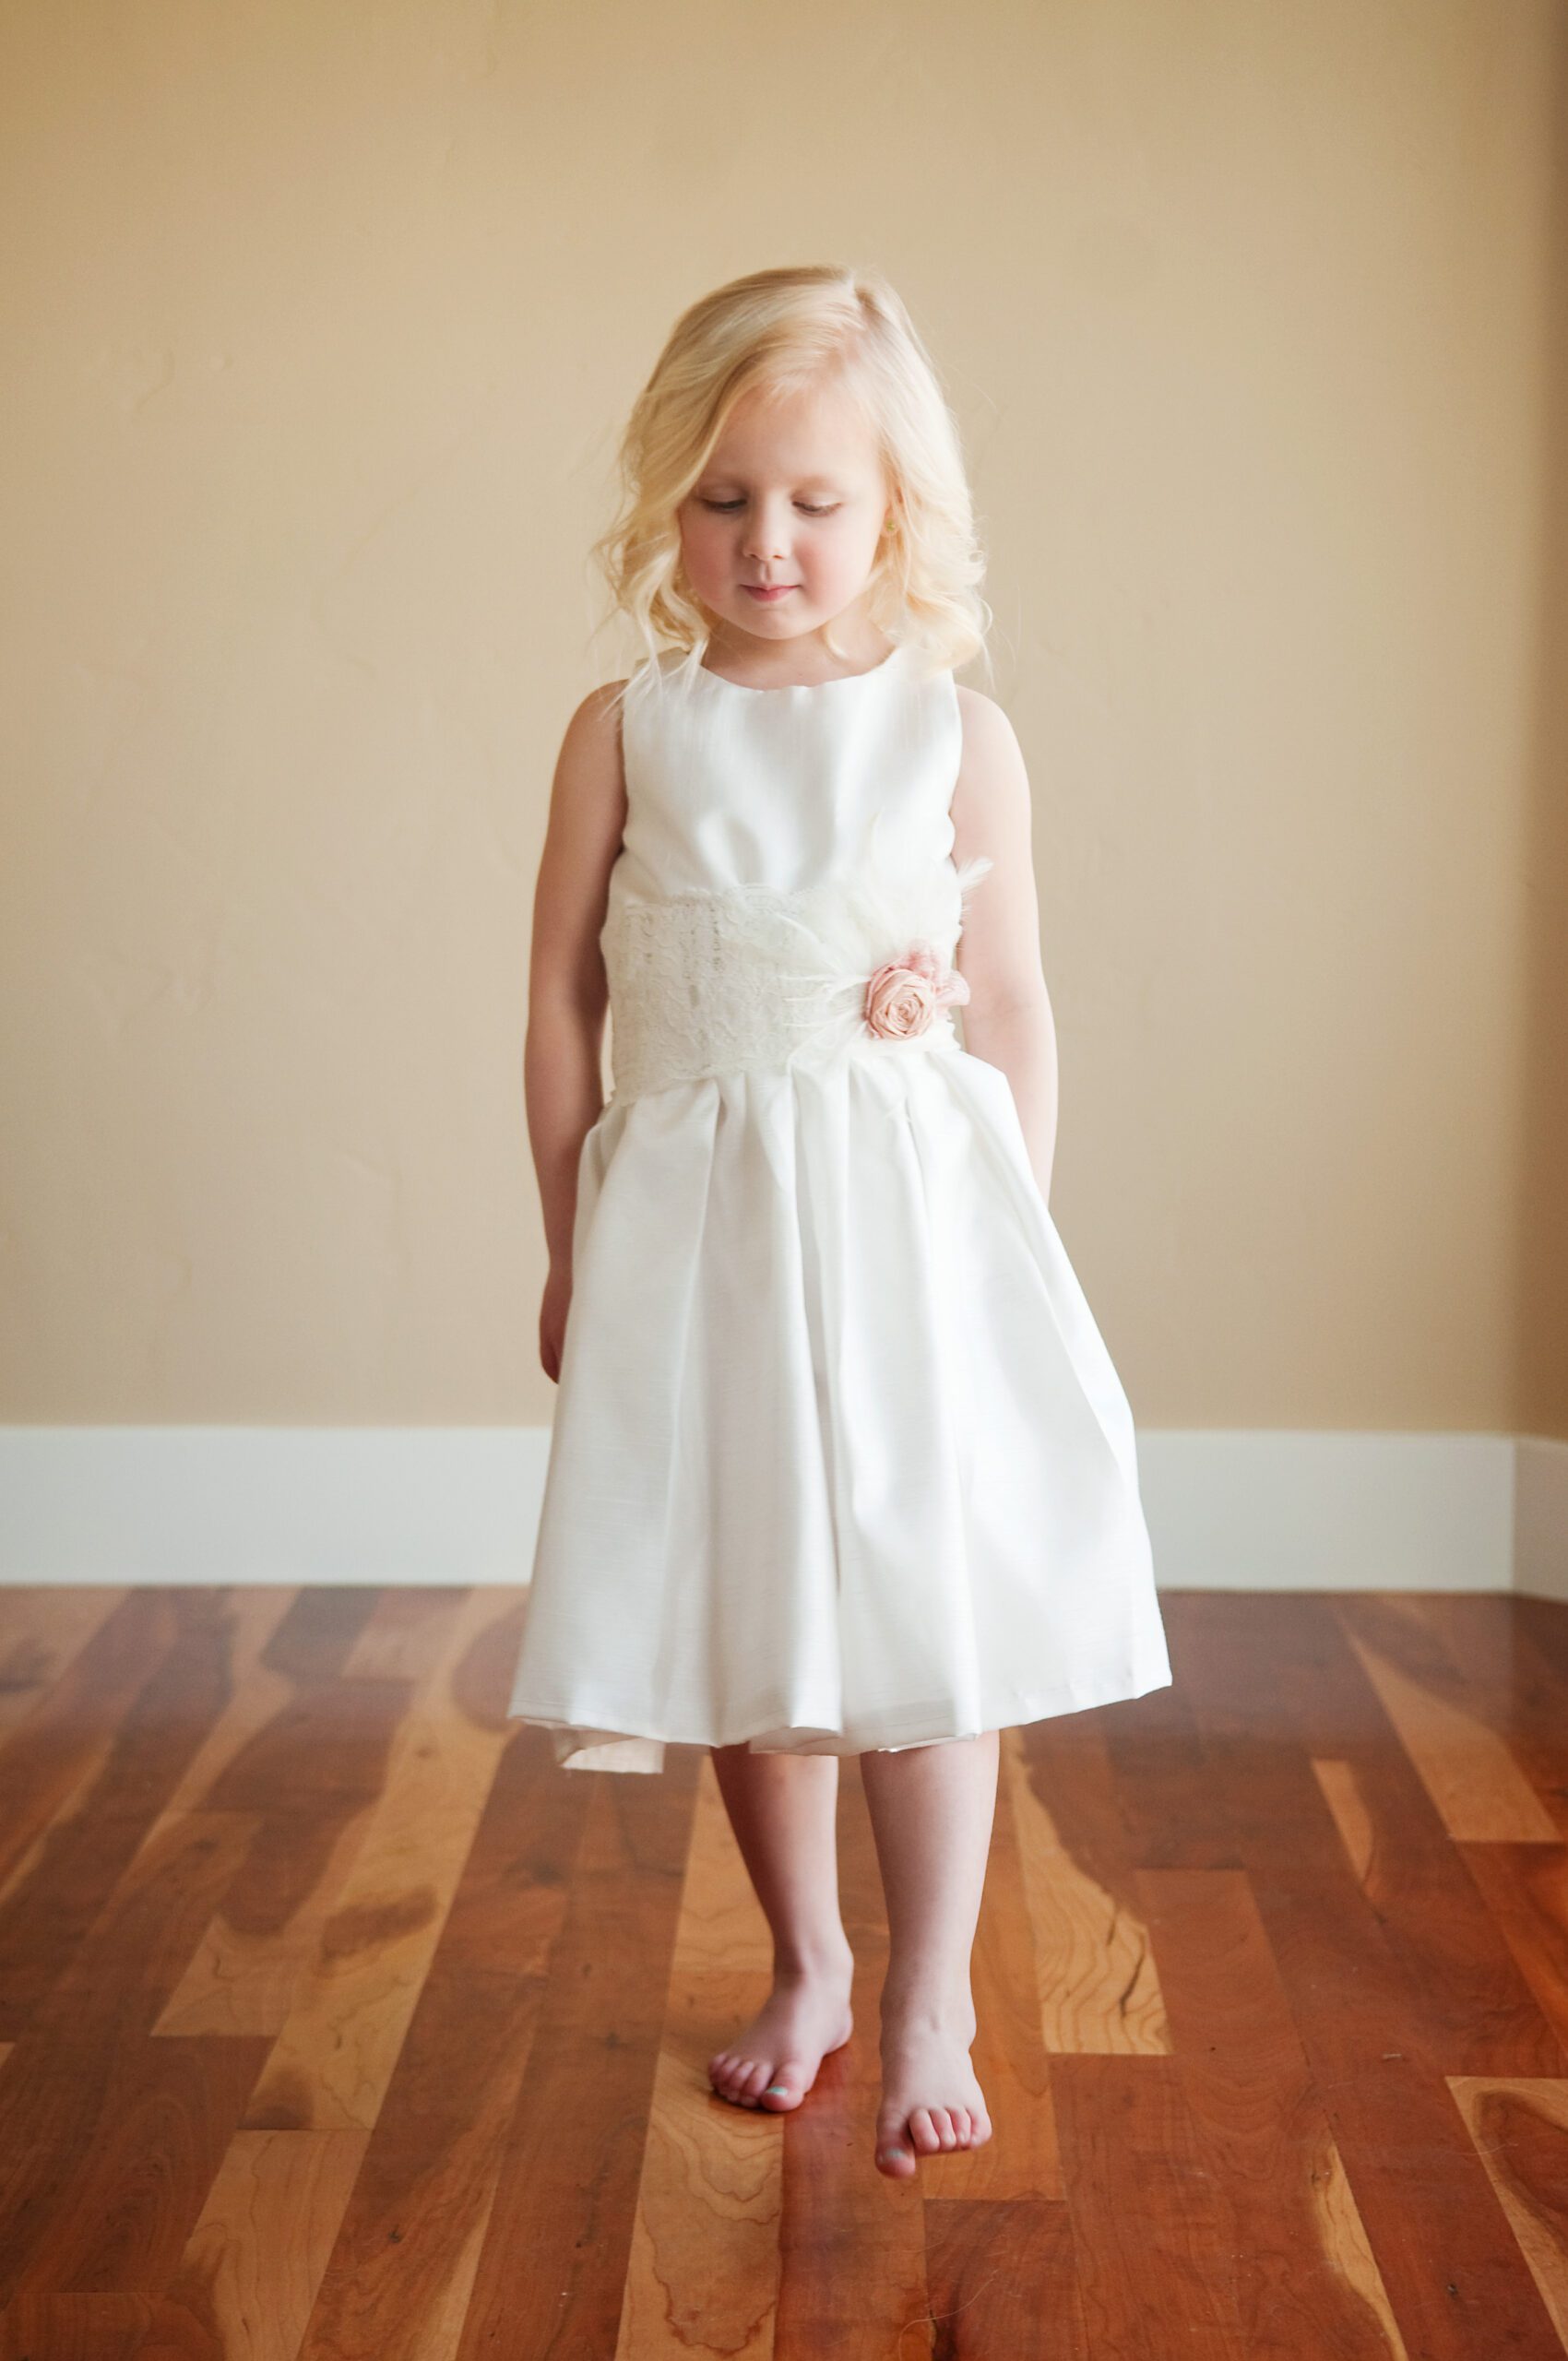 A photo of a 4 year old girl wearing an ivory cotton hand made flower girl dress